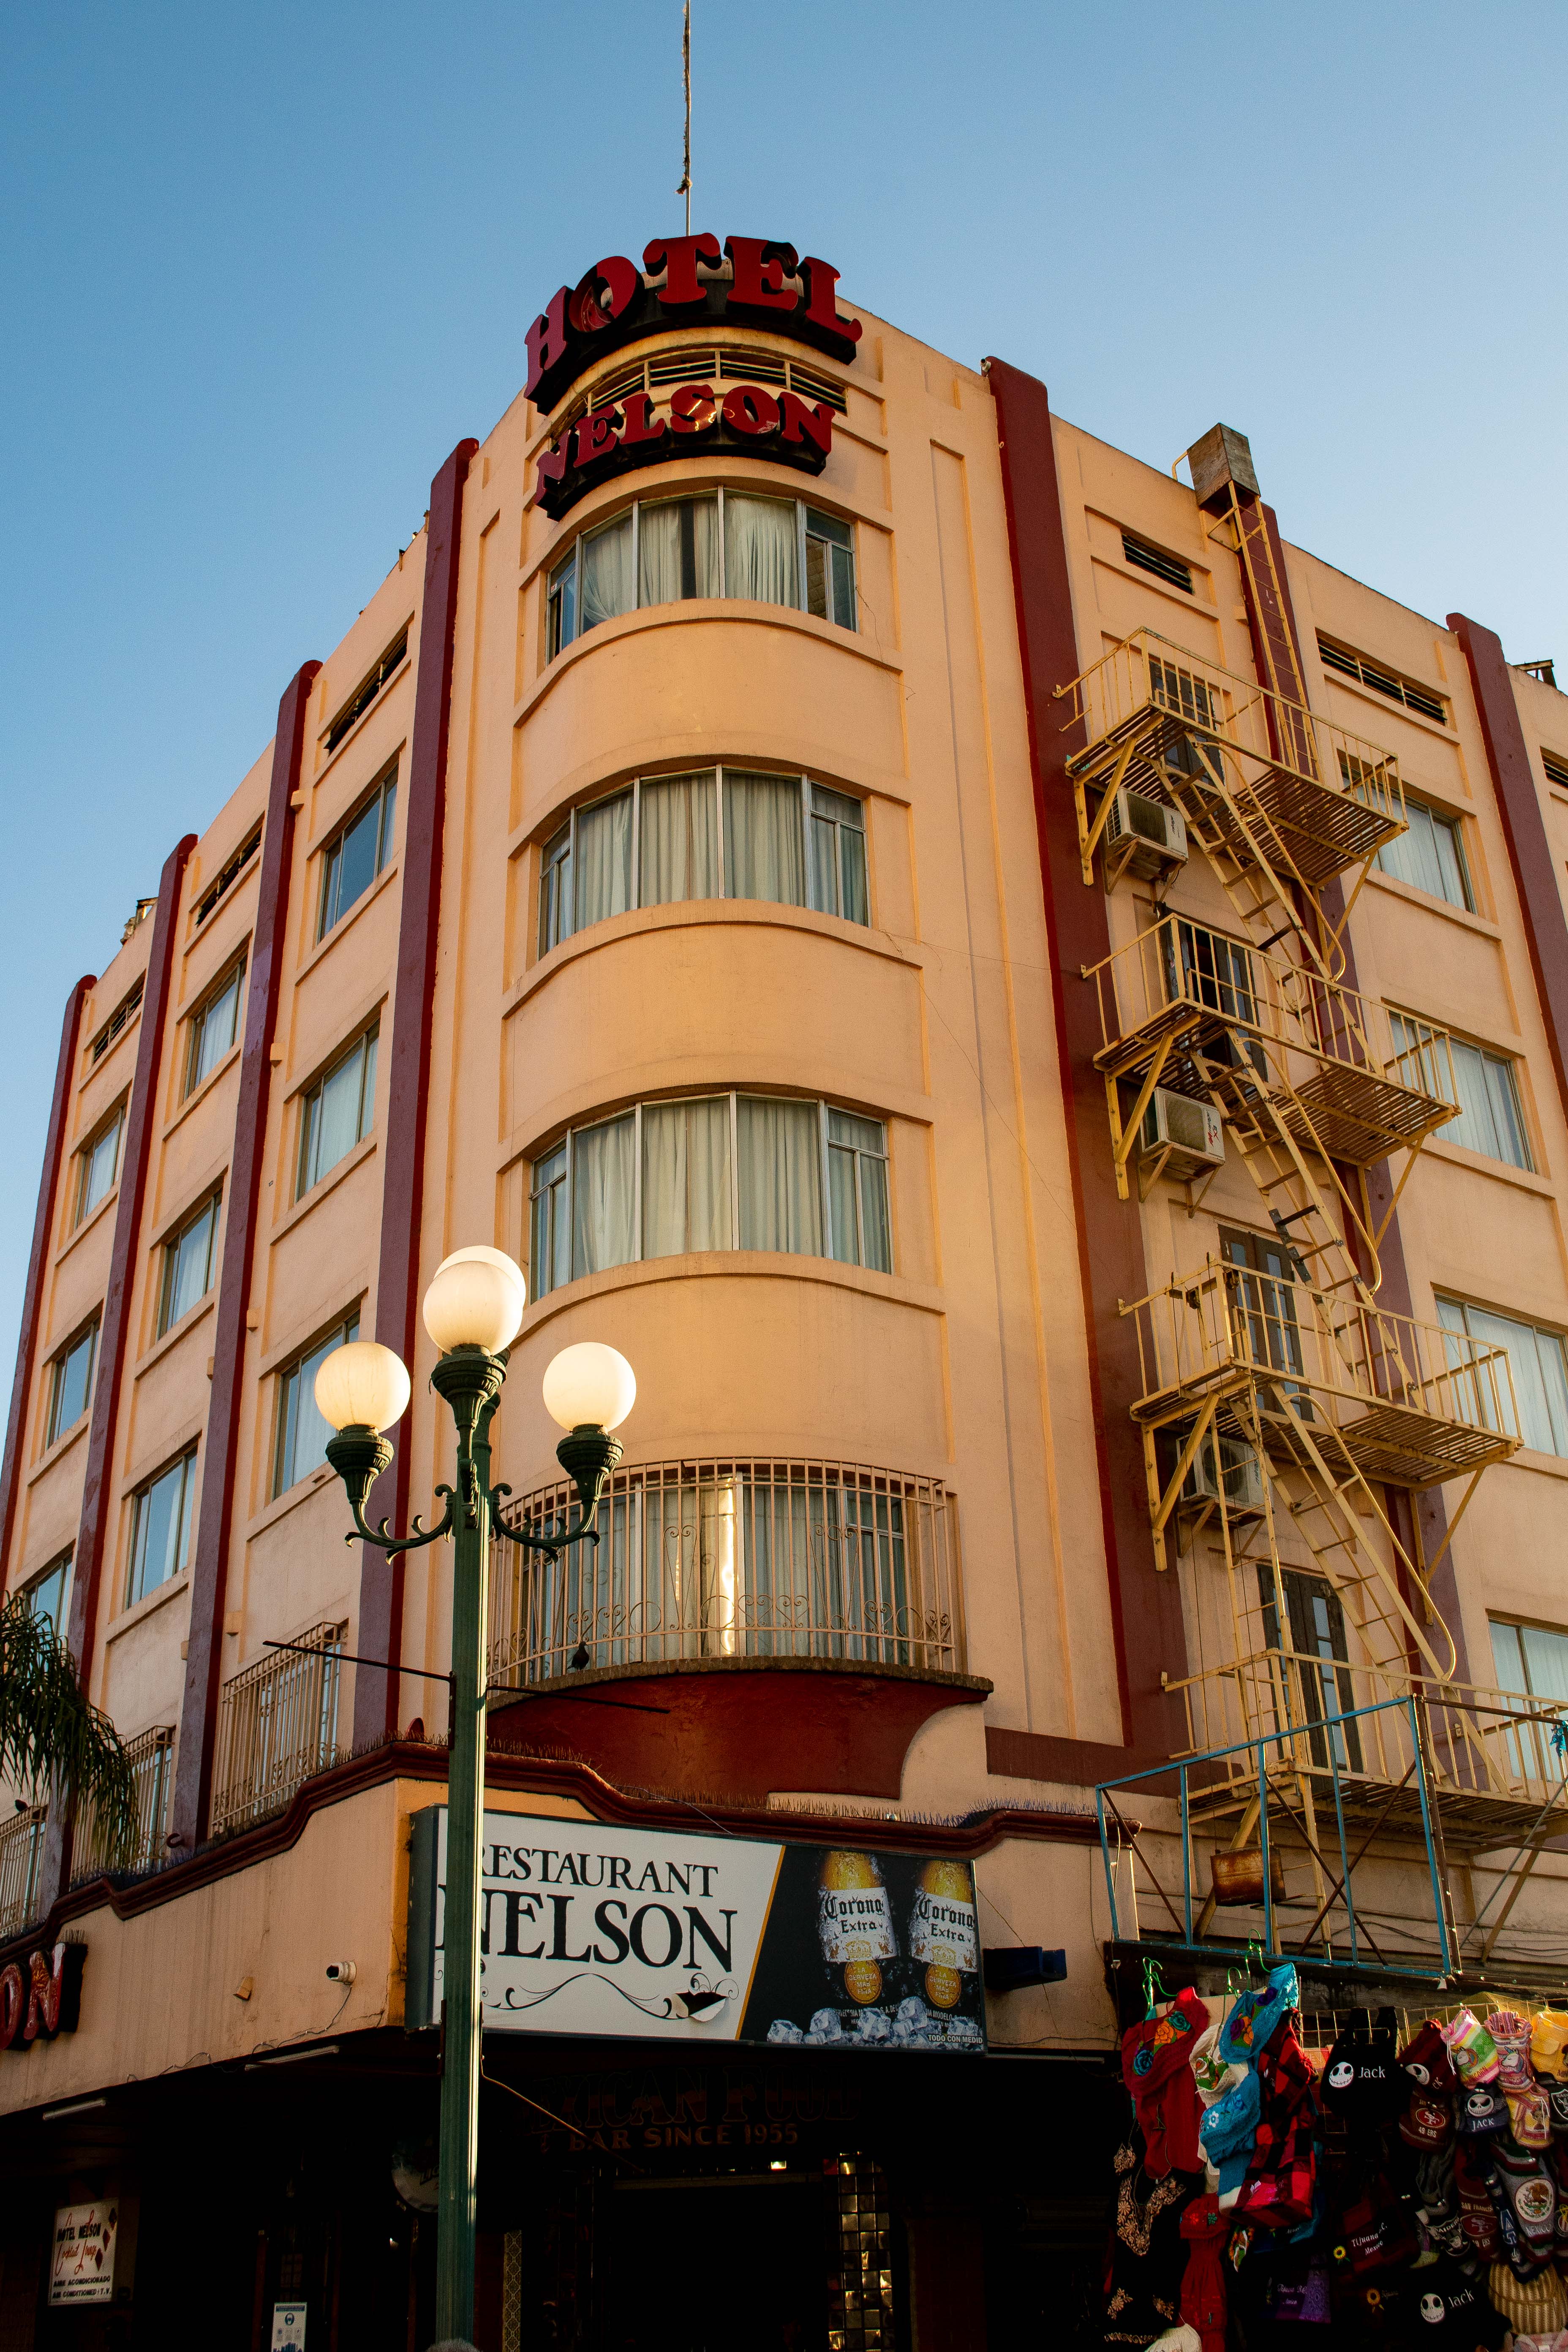 End of the line for TJ's Hotel Nelson? | San Diego Reader